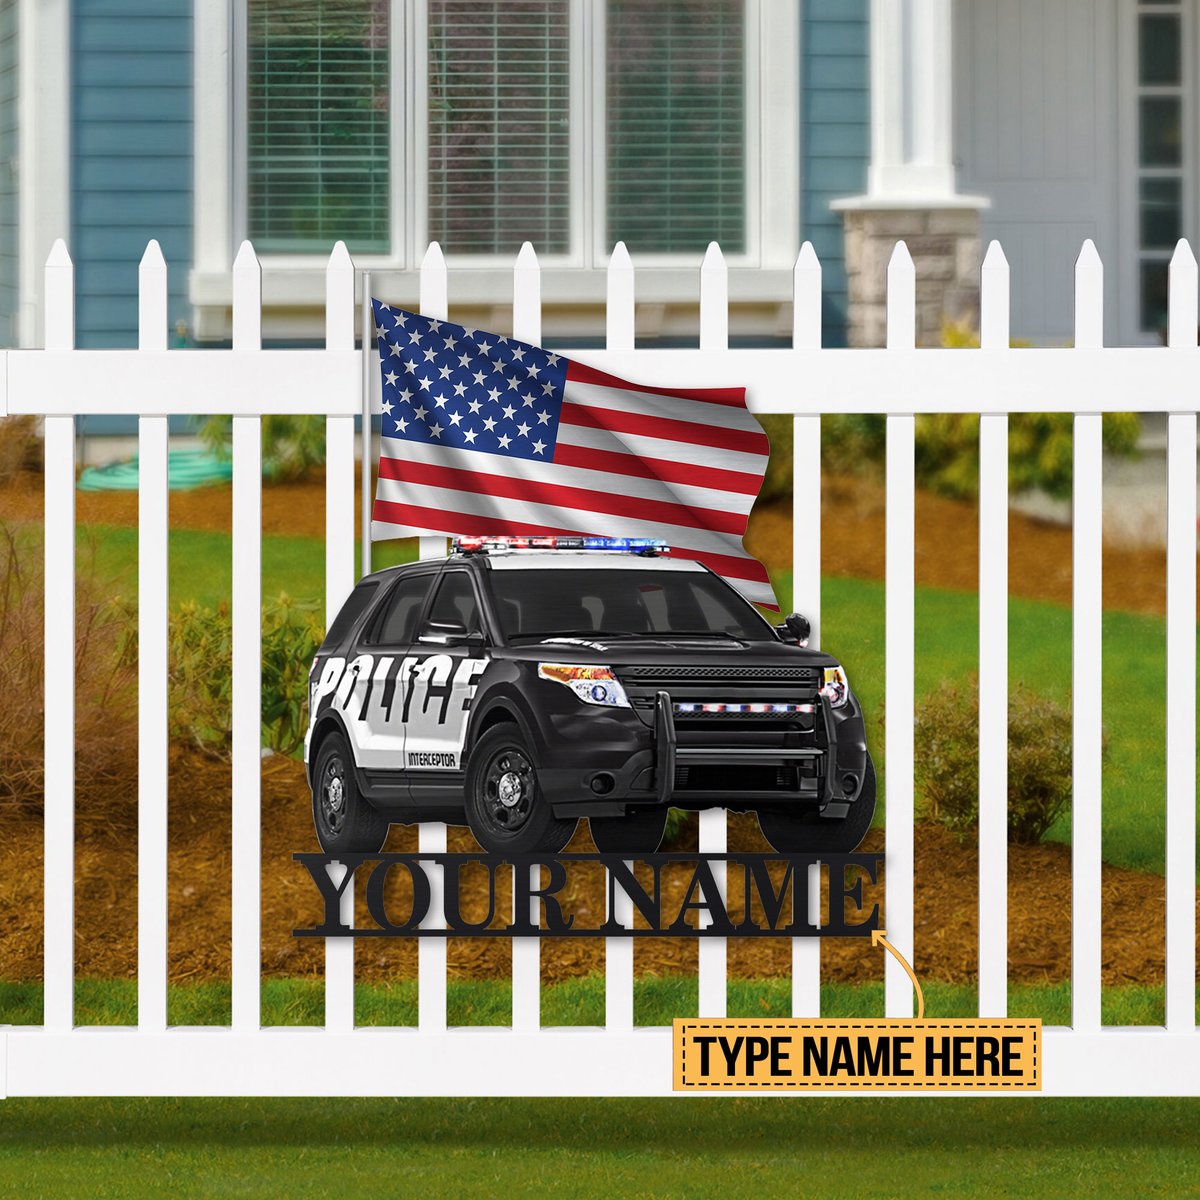 SUV Police American flag custom personalized metal sign 9